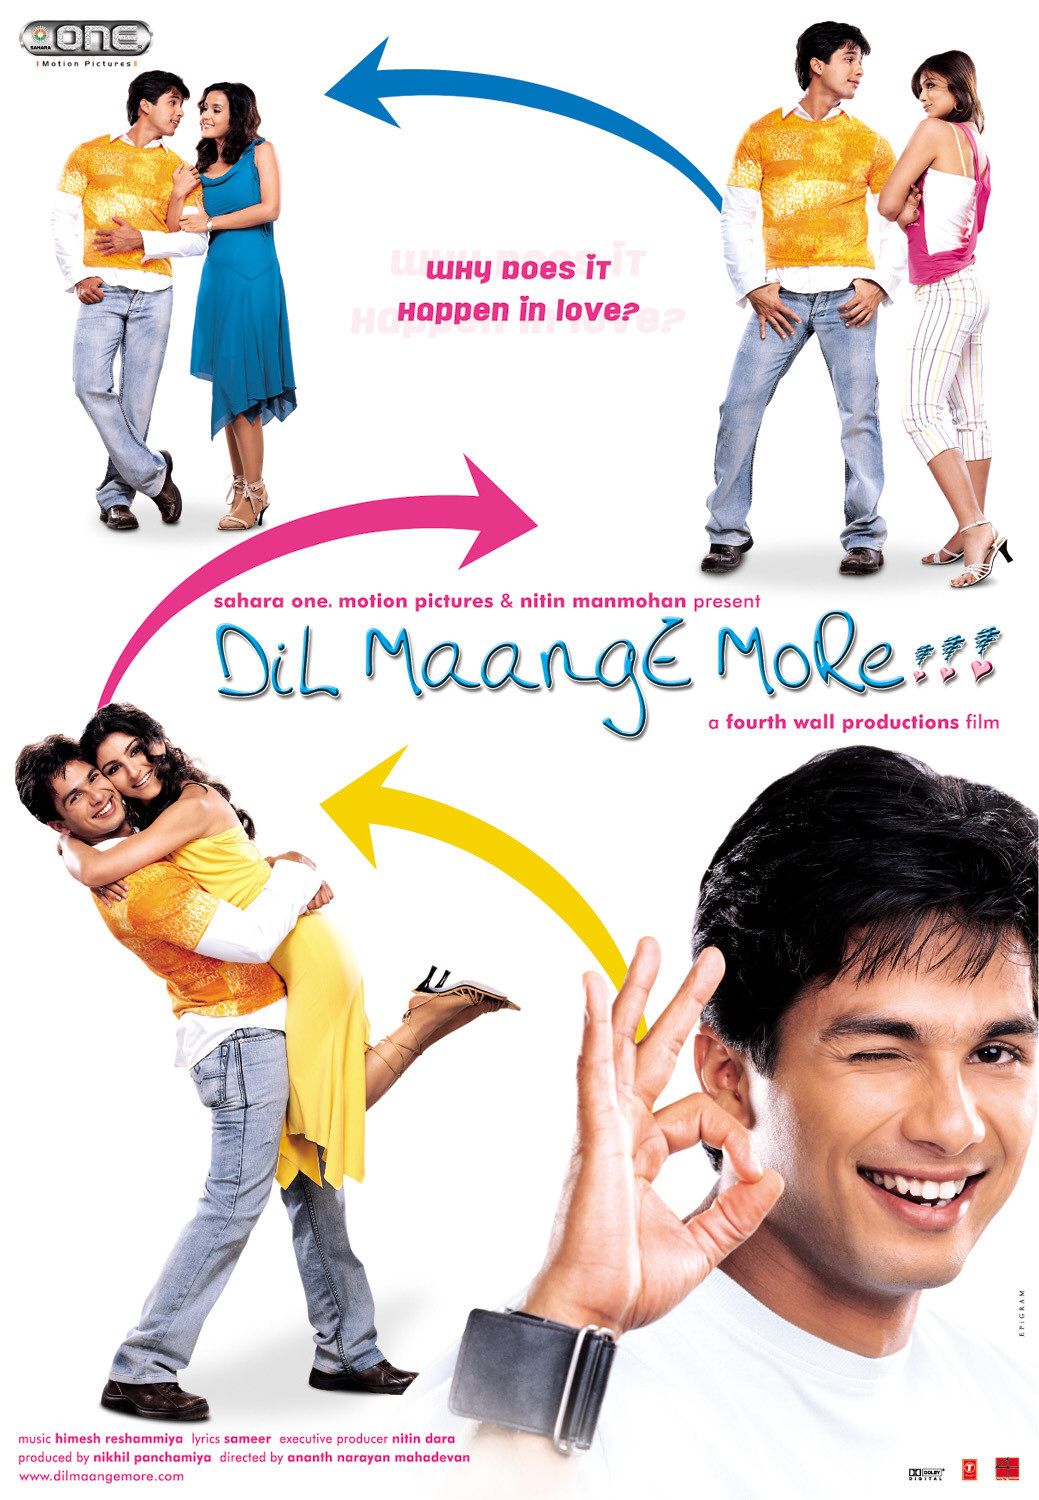 Extra Large Movie Poster Image for Dil Maange More!!! (#4 of 7)